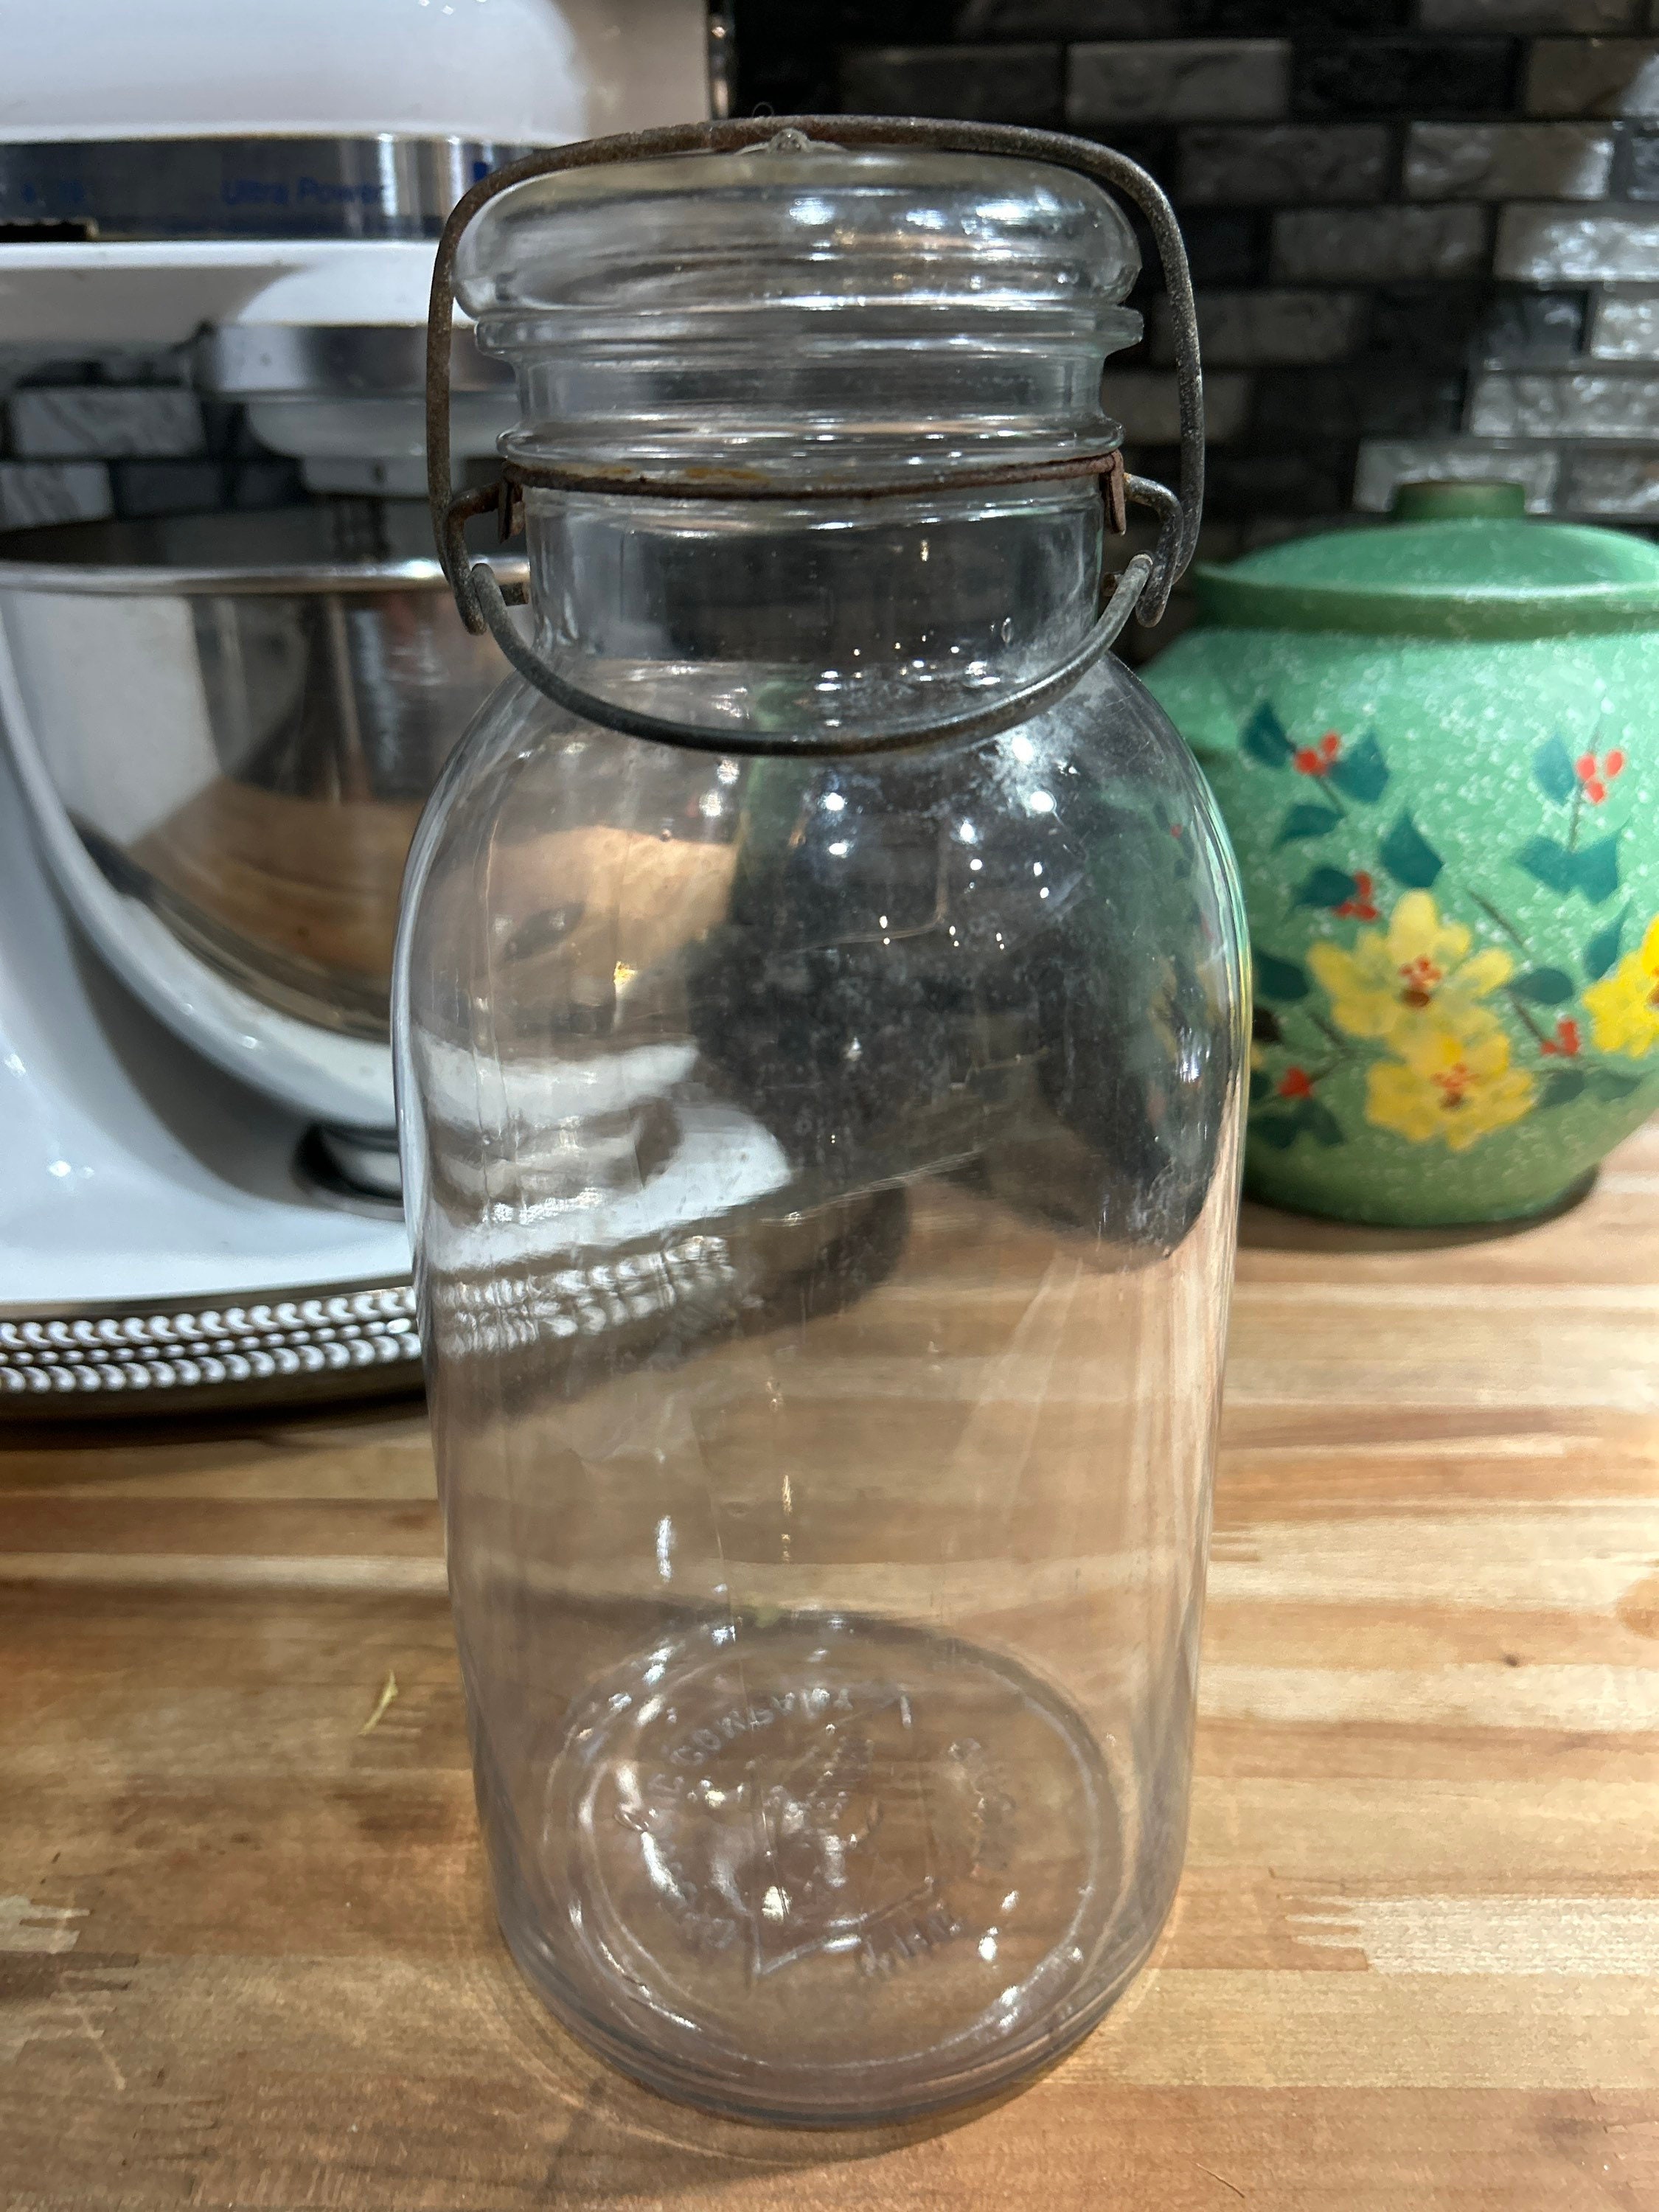 Vintage 1 ONE GALLON CLEAR GLASS JAR COOKIE JAR NO LID #470128 Canister